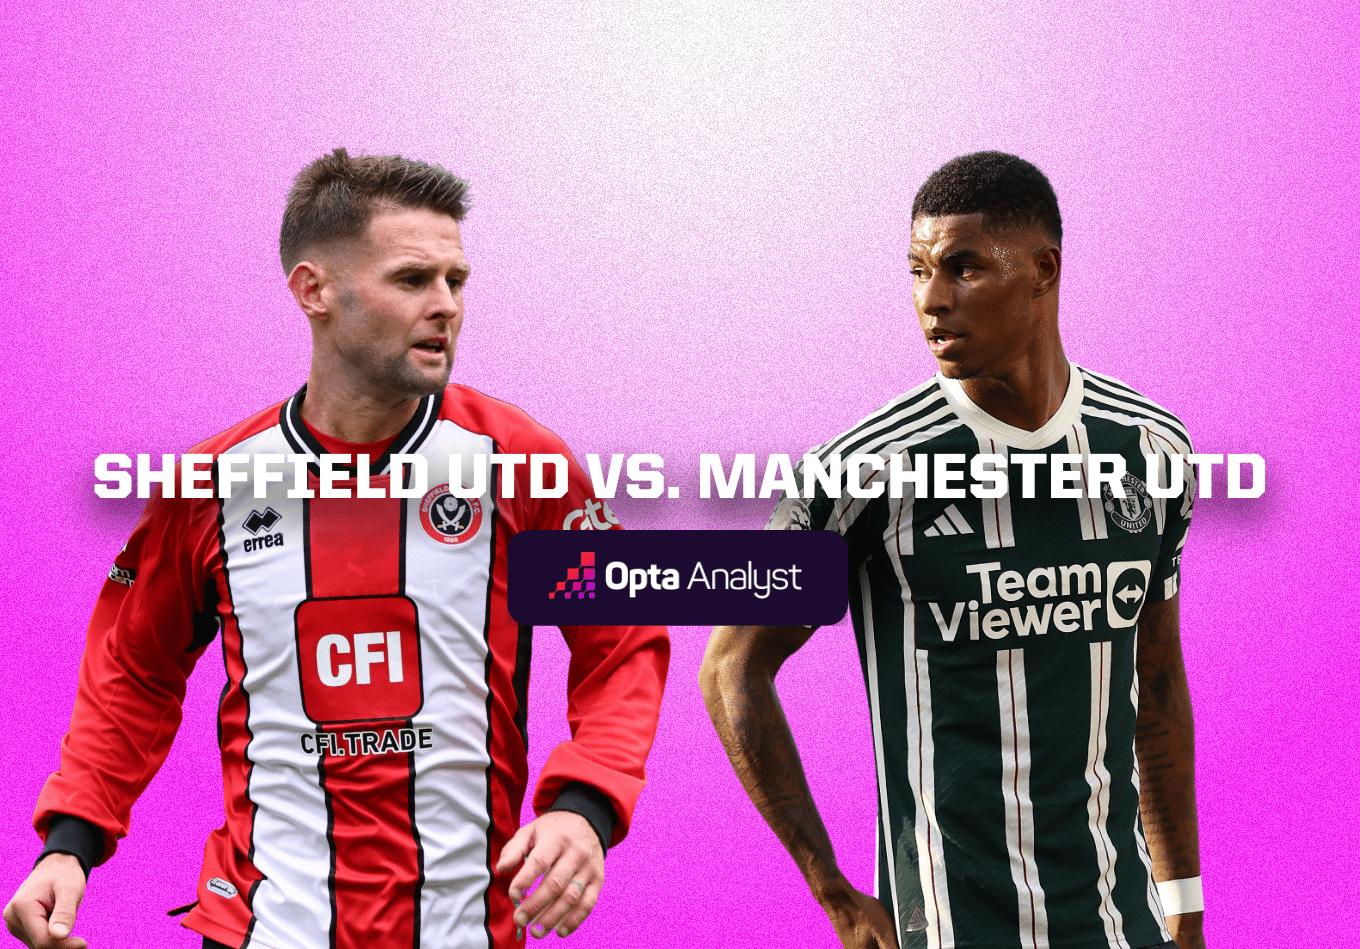 Sheffield United vs Manchester United: Prediction and Preview